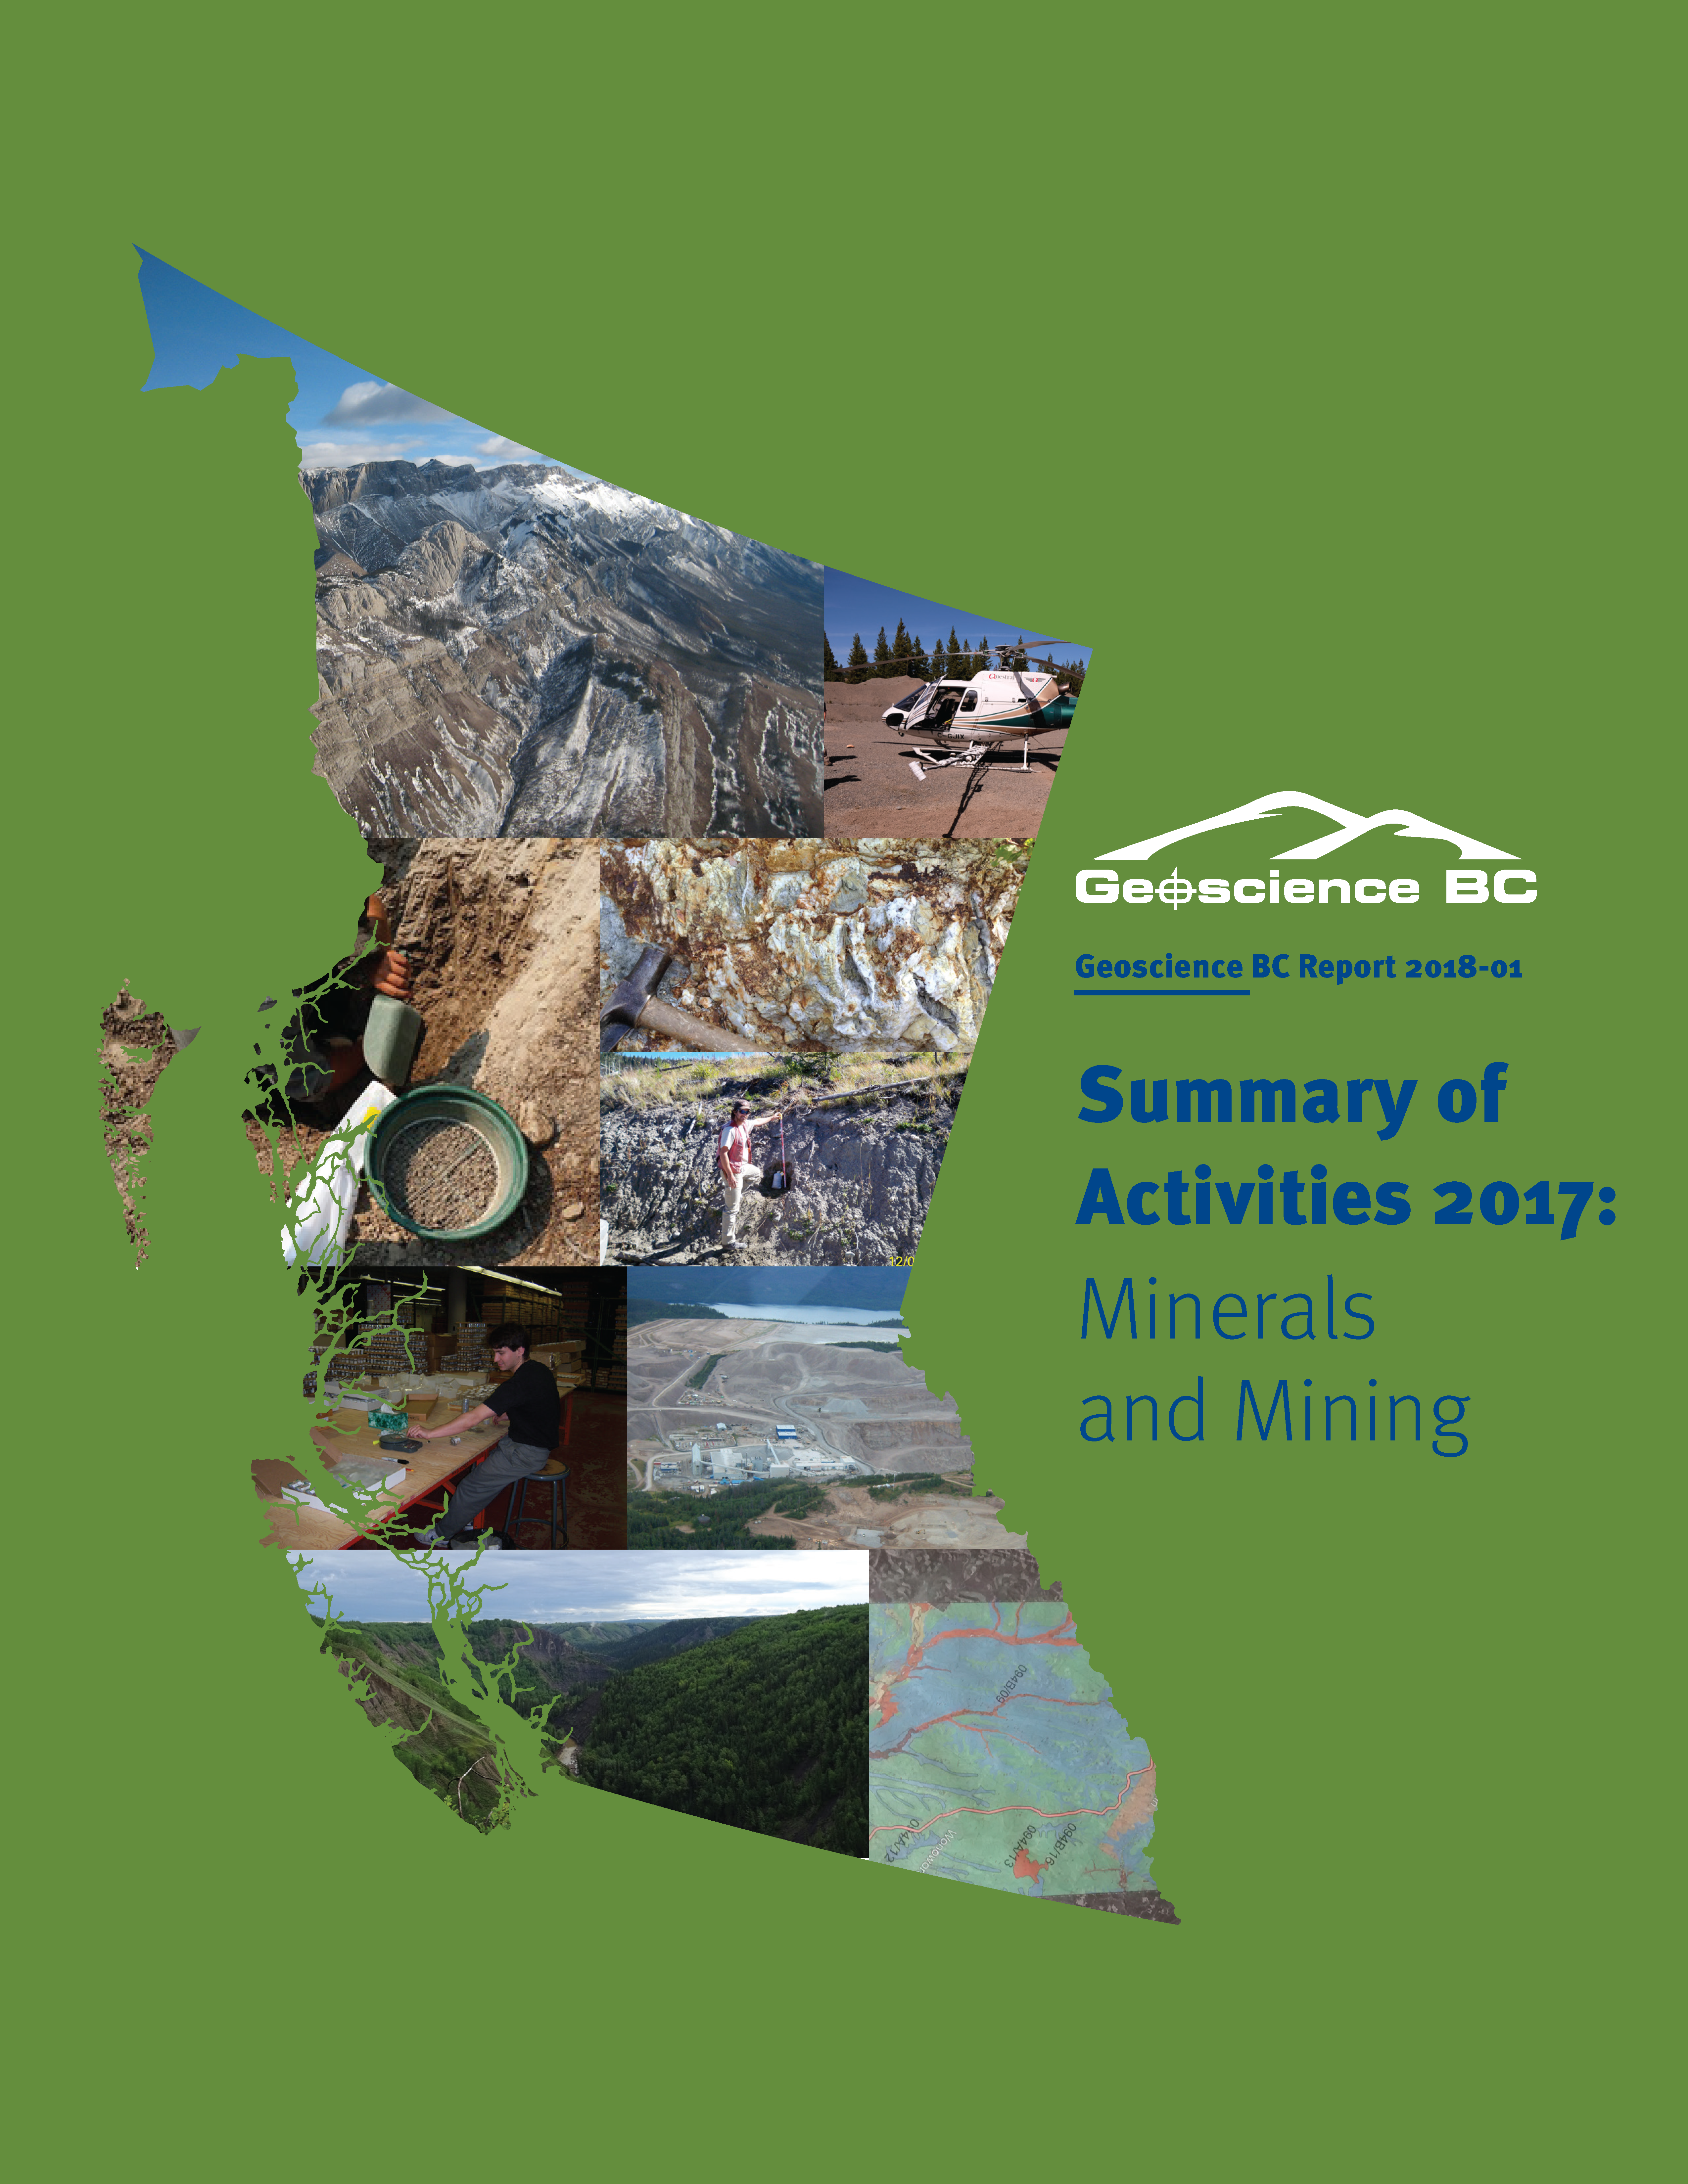 Summary of Activities 2017: Minerals and Mining